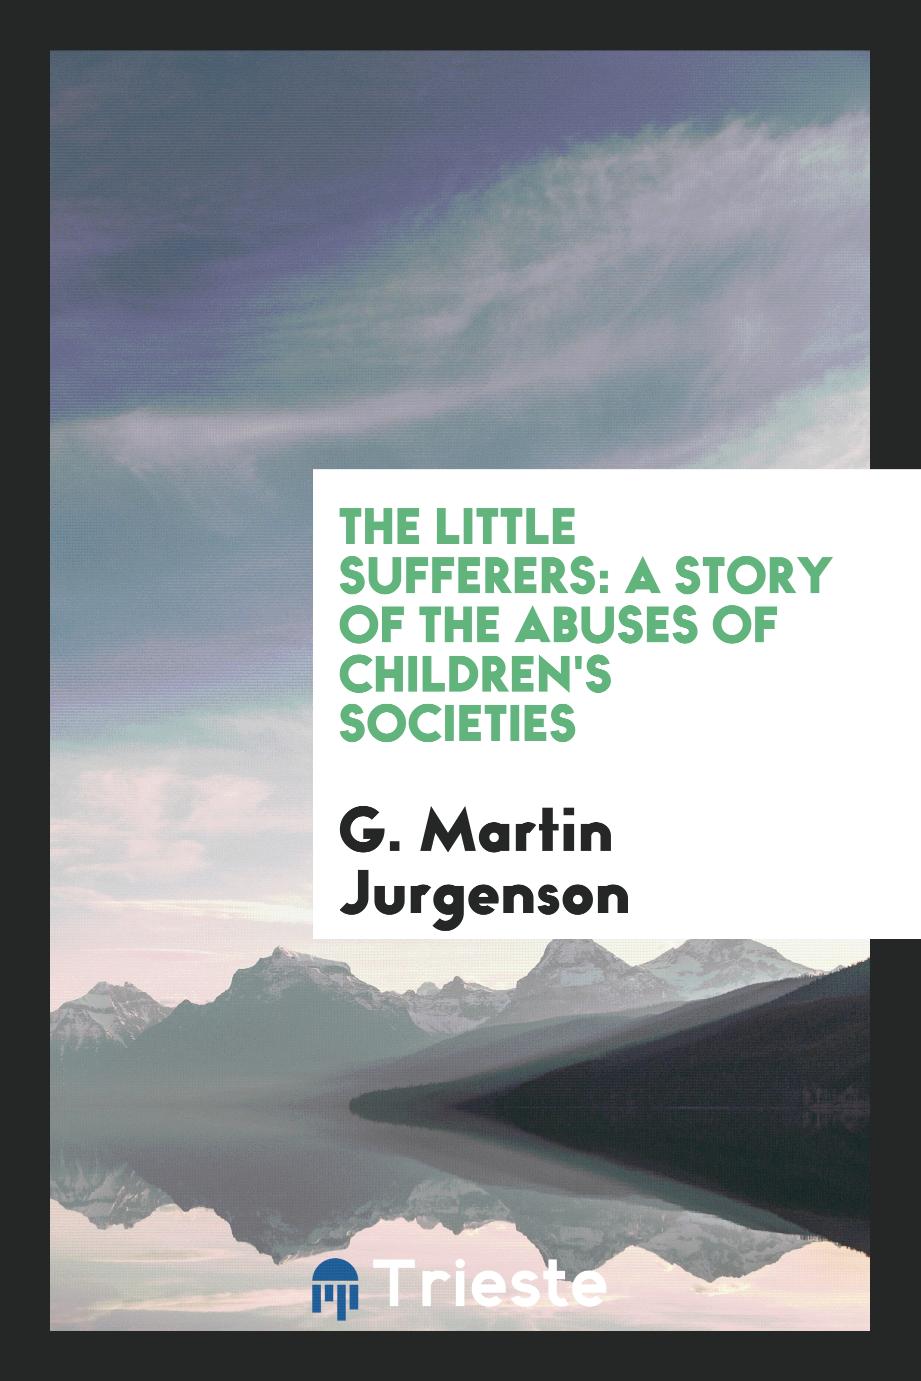 The Little Sufferers: A Story of The Abuses of Children's Societies